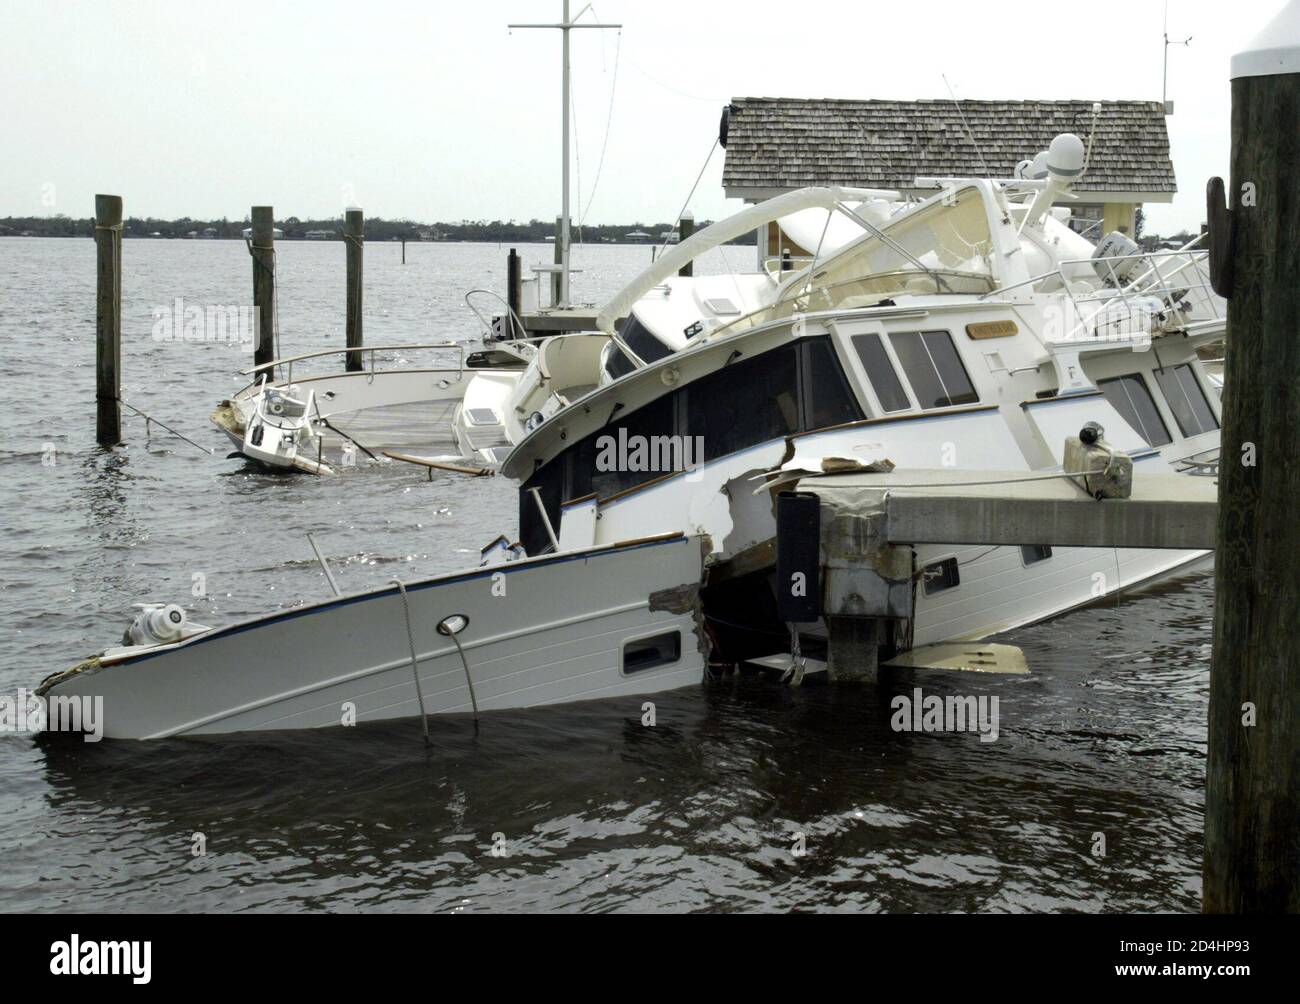 A yacht named 'Another Day' lies sunk as a result of Hurricane Frances, with its hull smashed in on Hutchinson Island near Port St. Lucie, Florida, September 6, 2004. [President George W. Bush will visit Florida on September 8 and has asked the U.S. Congress for two billion dollars in emergency aid for the hurricane ravaged state.] Stock Photo